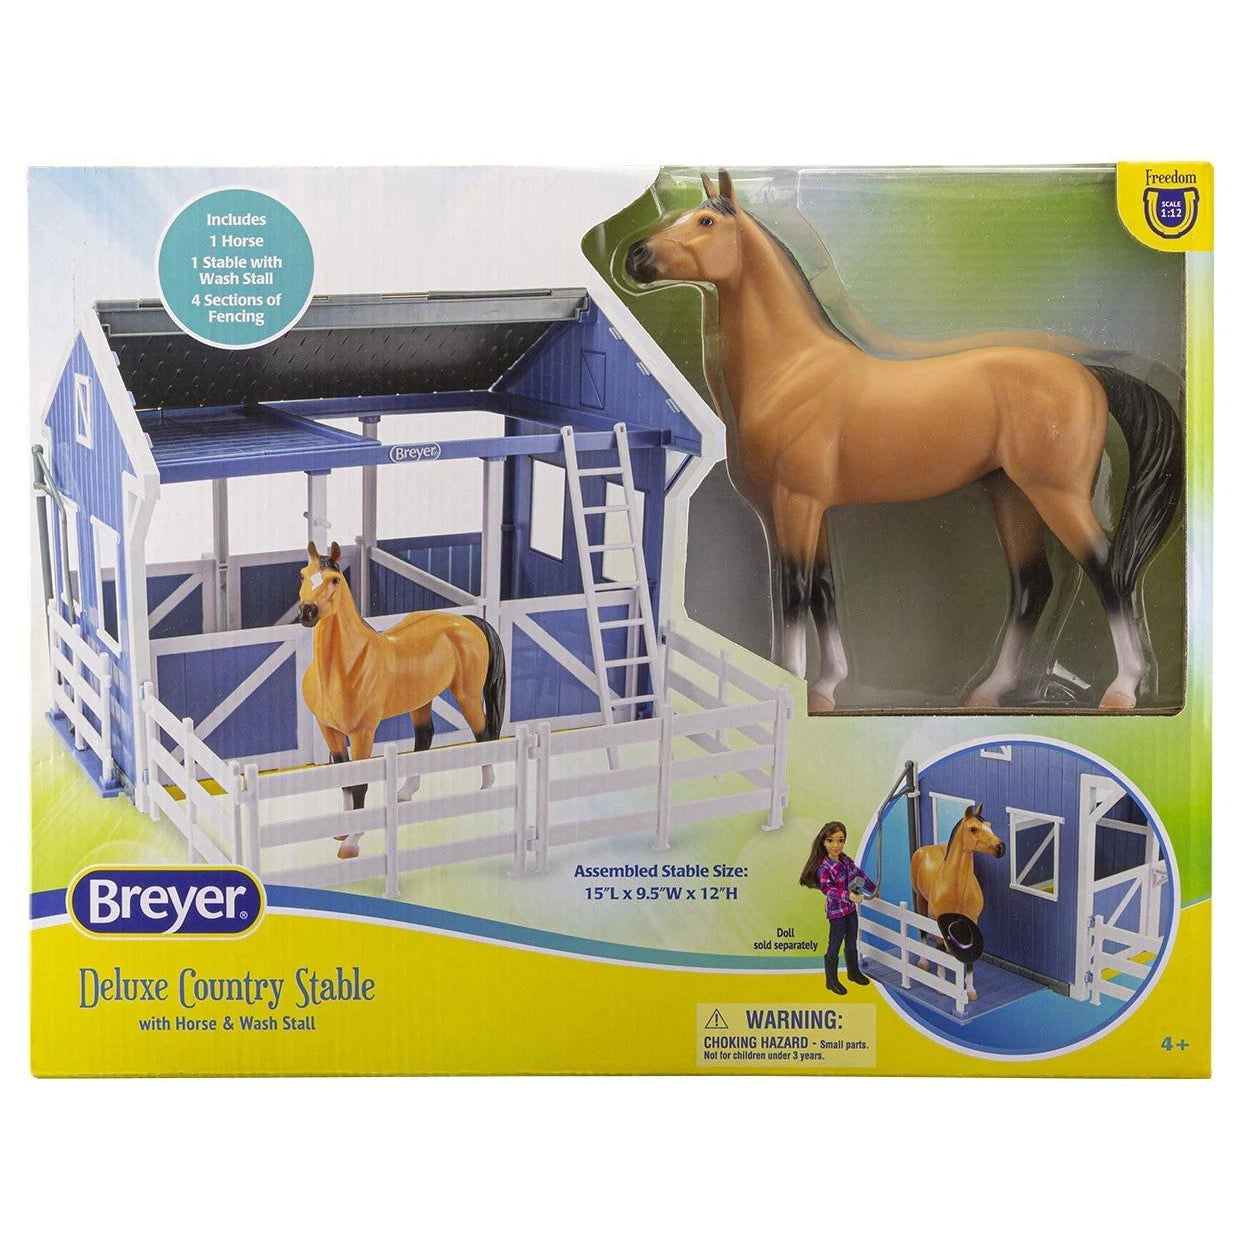 Breyer Freedom Series Deluxe Country Stable With Horse & Wash Stall-BREYER-Little Giant Kidz